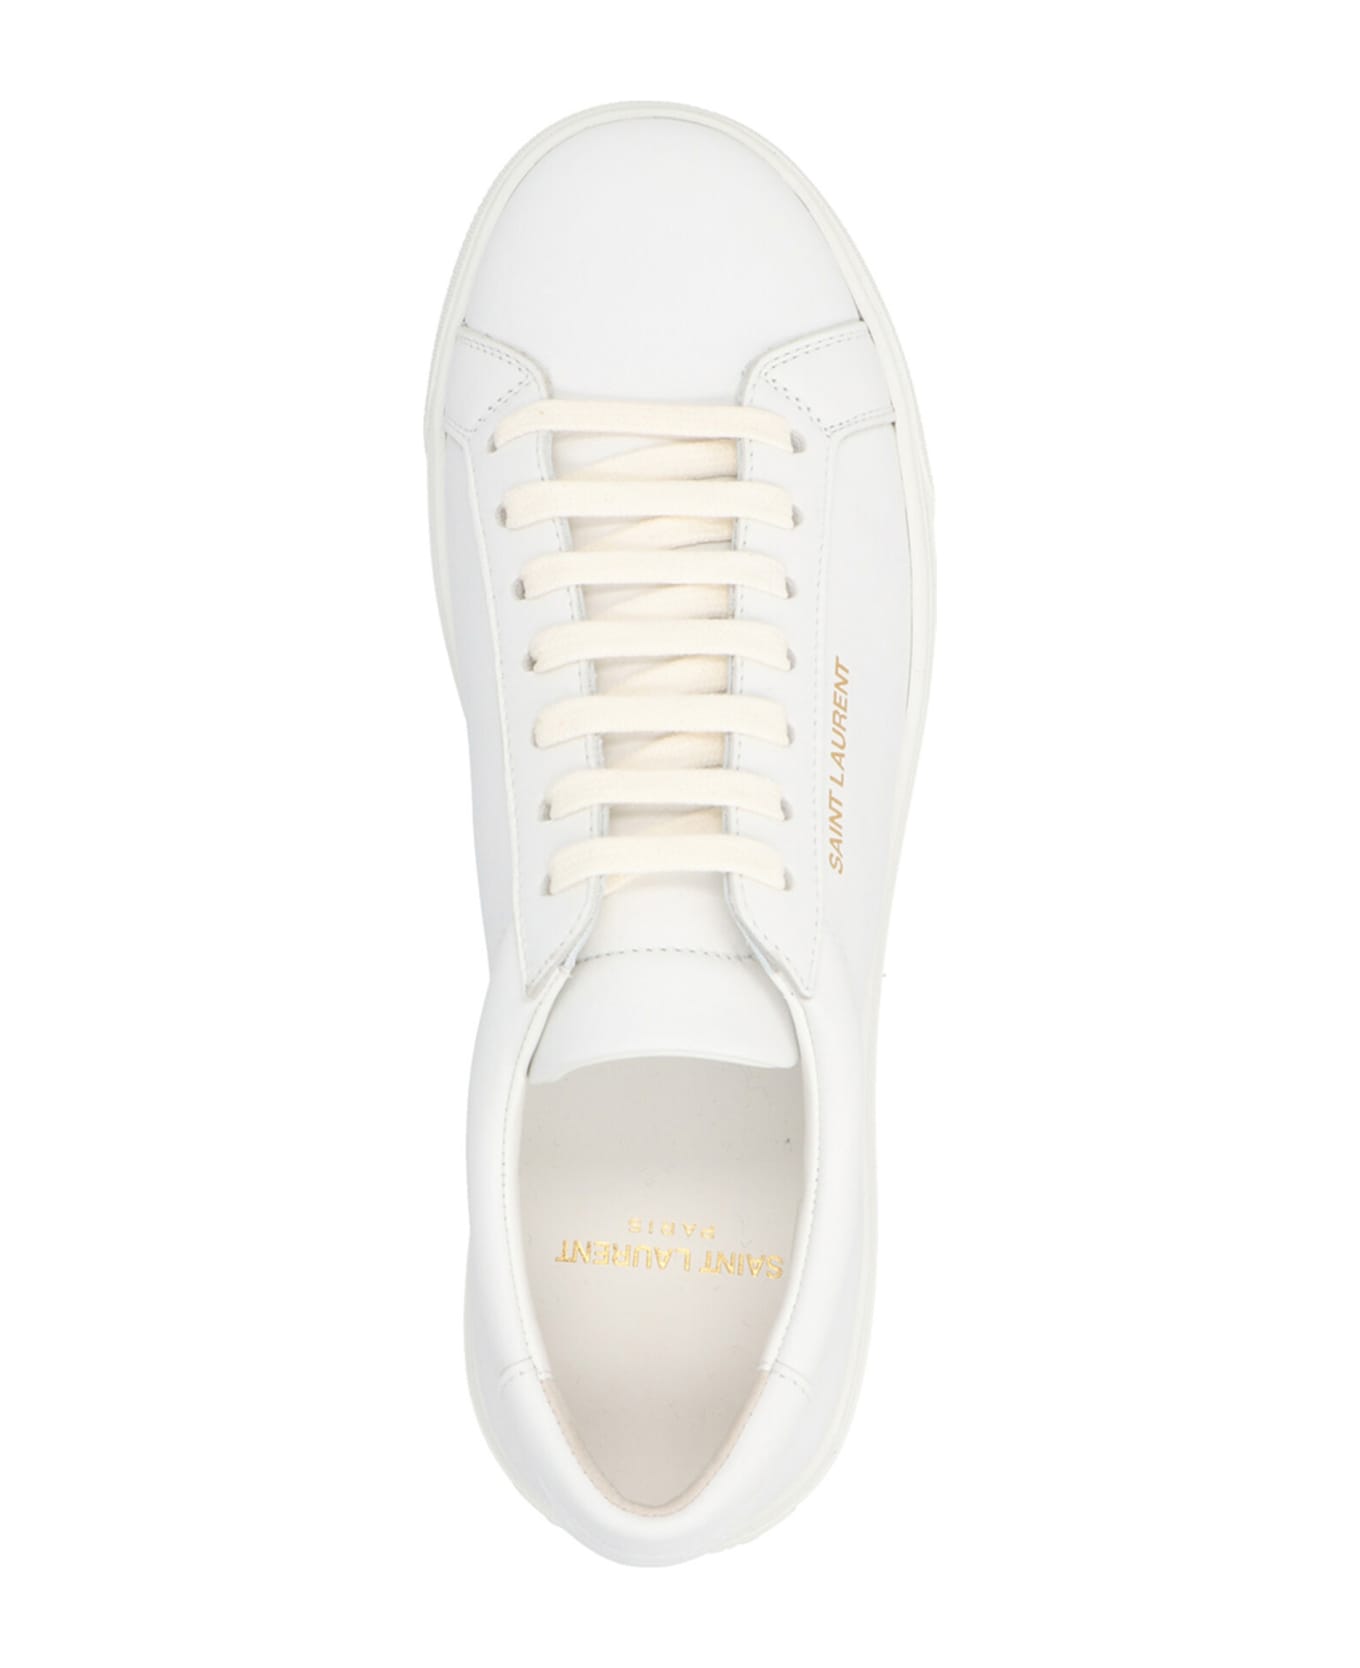 Saint Laurent Andy Leather Sneakers - White